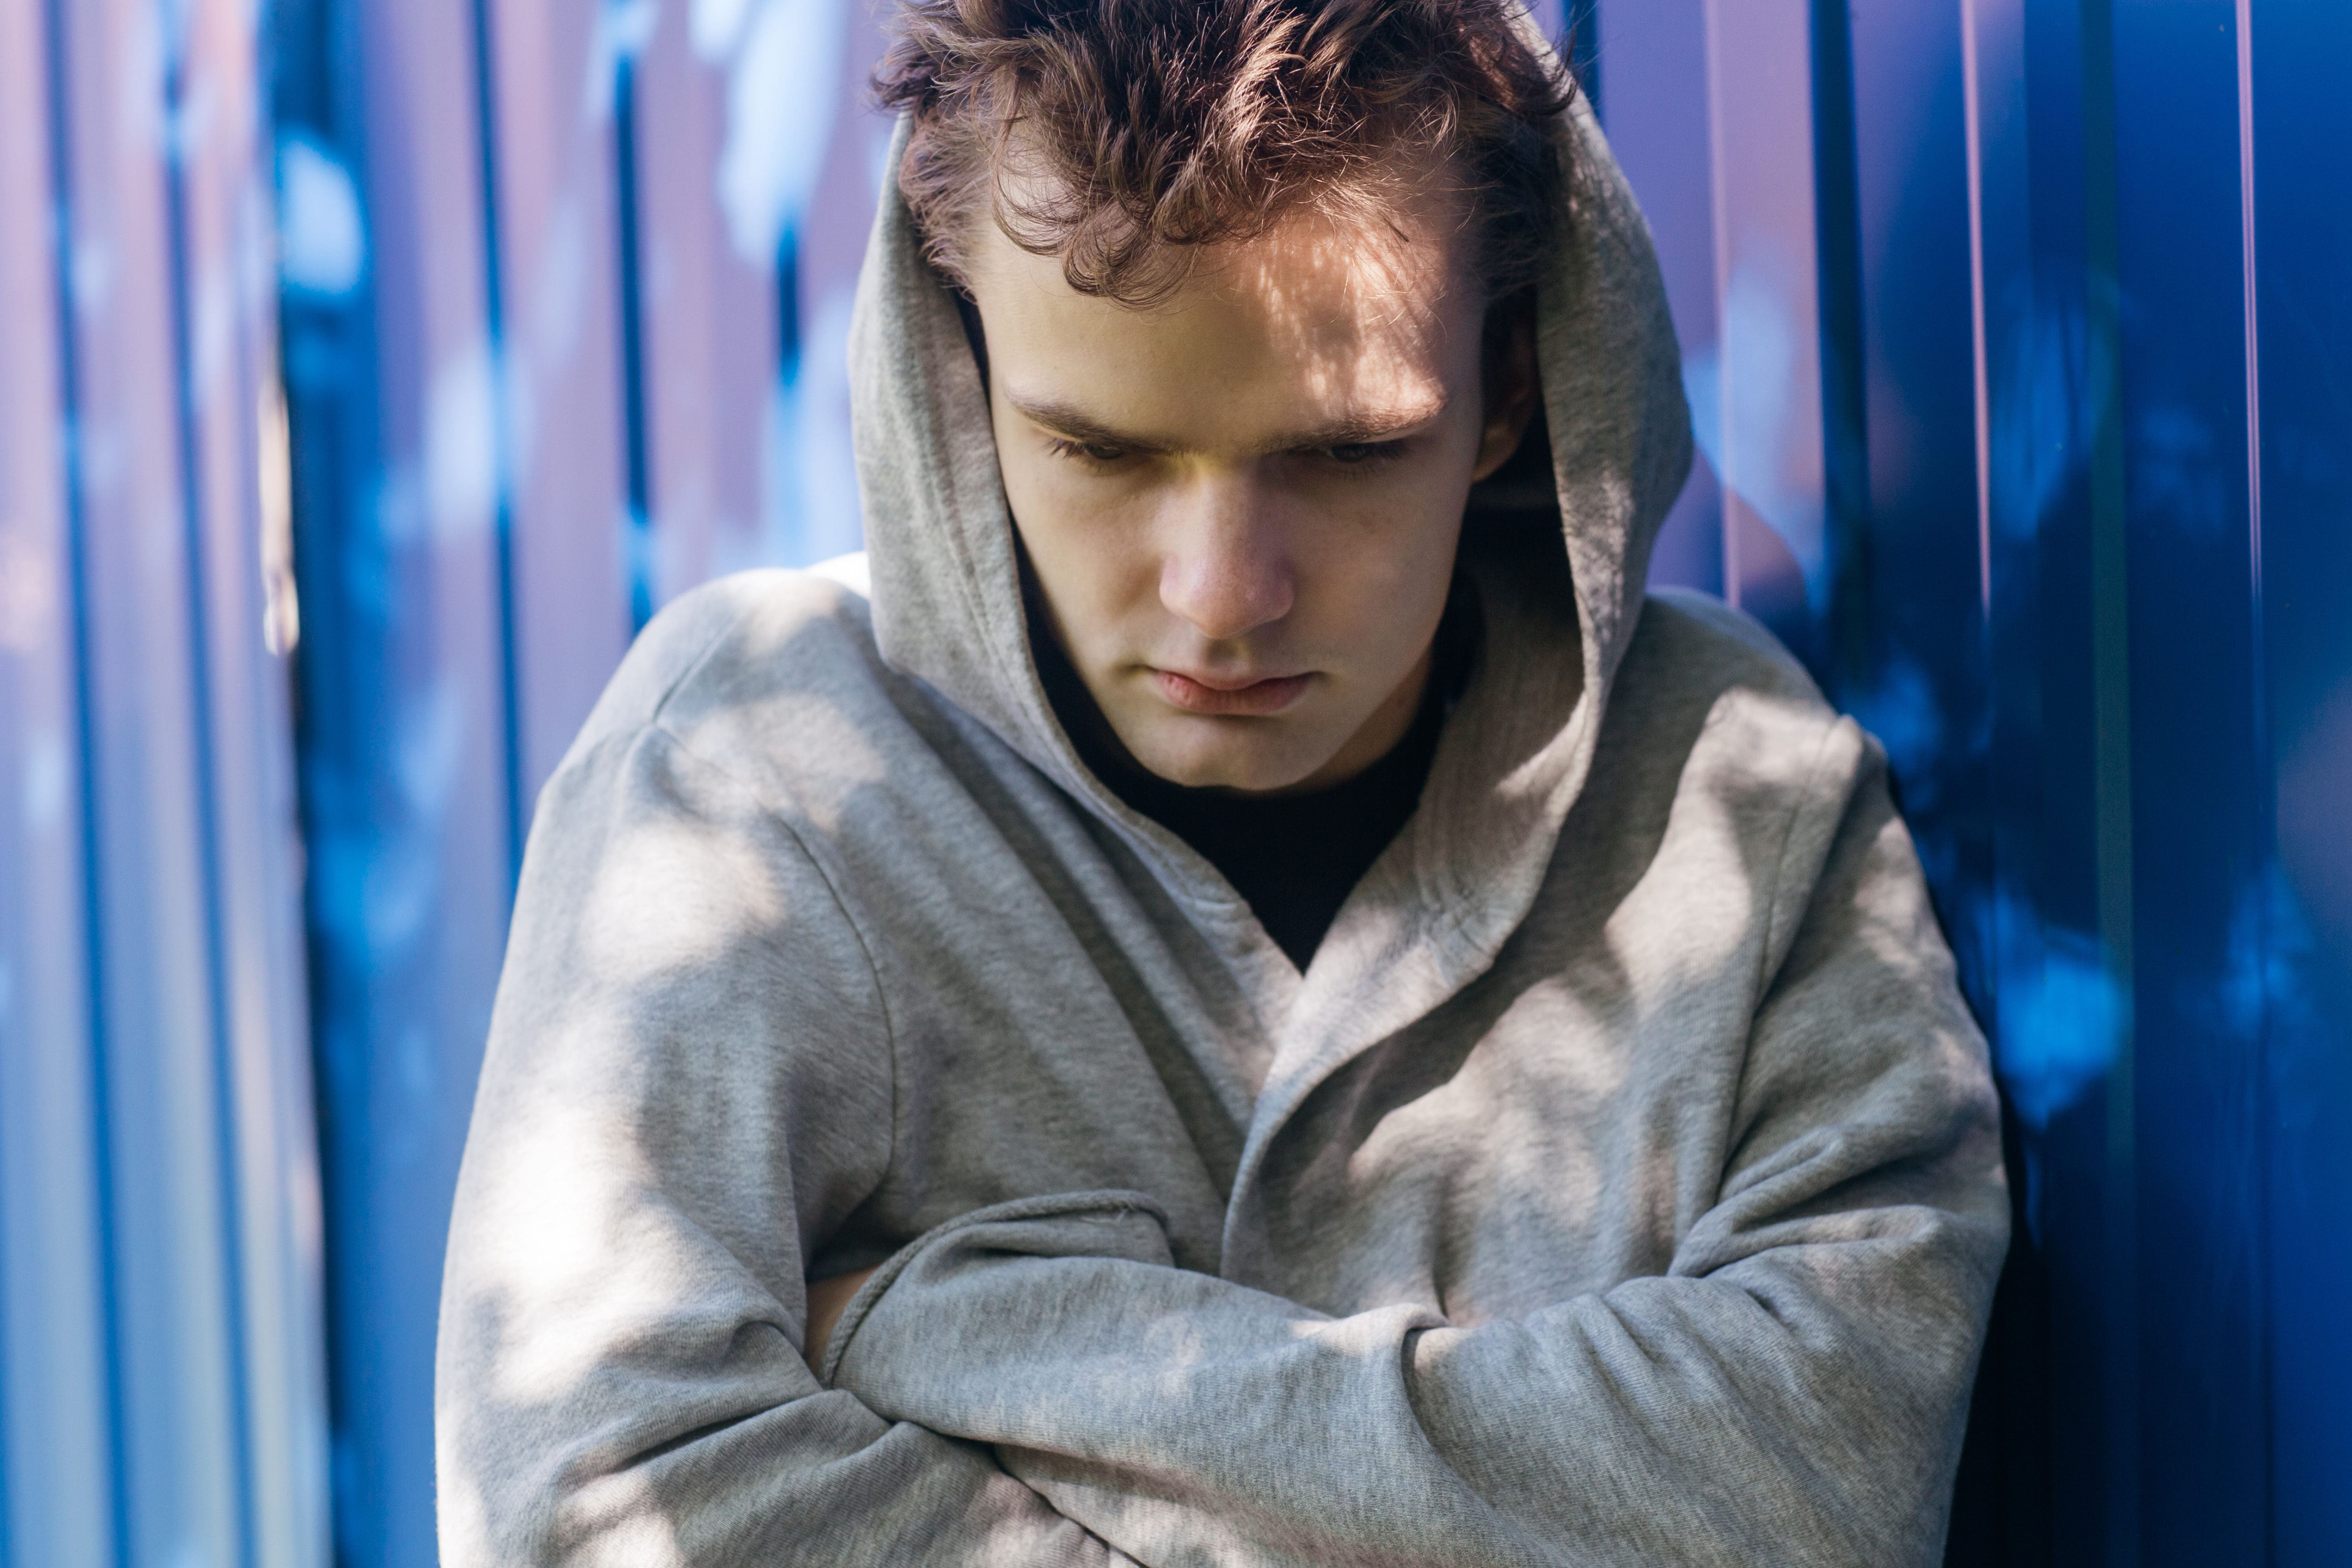 A young man in a hoodie seeking addiction recovery support leans against a blue wall, contemplating his journey towards wellness in an outpatient program.